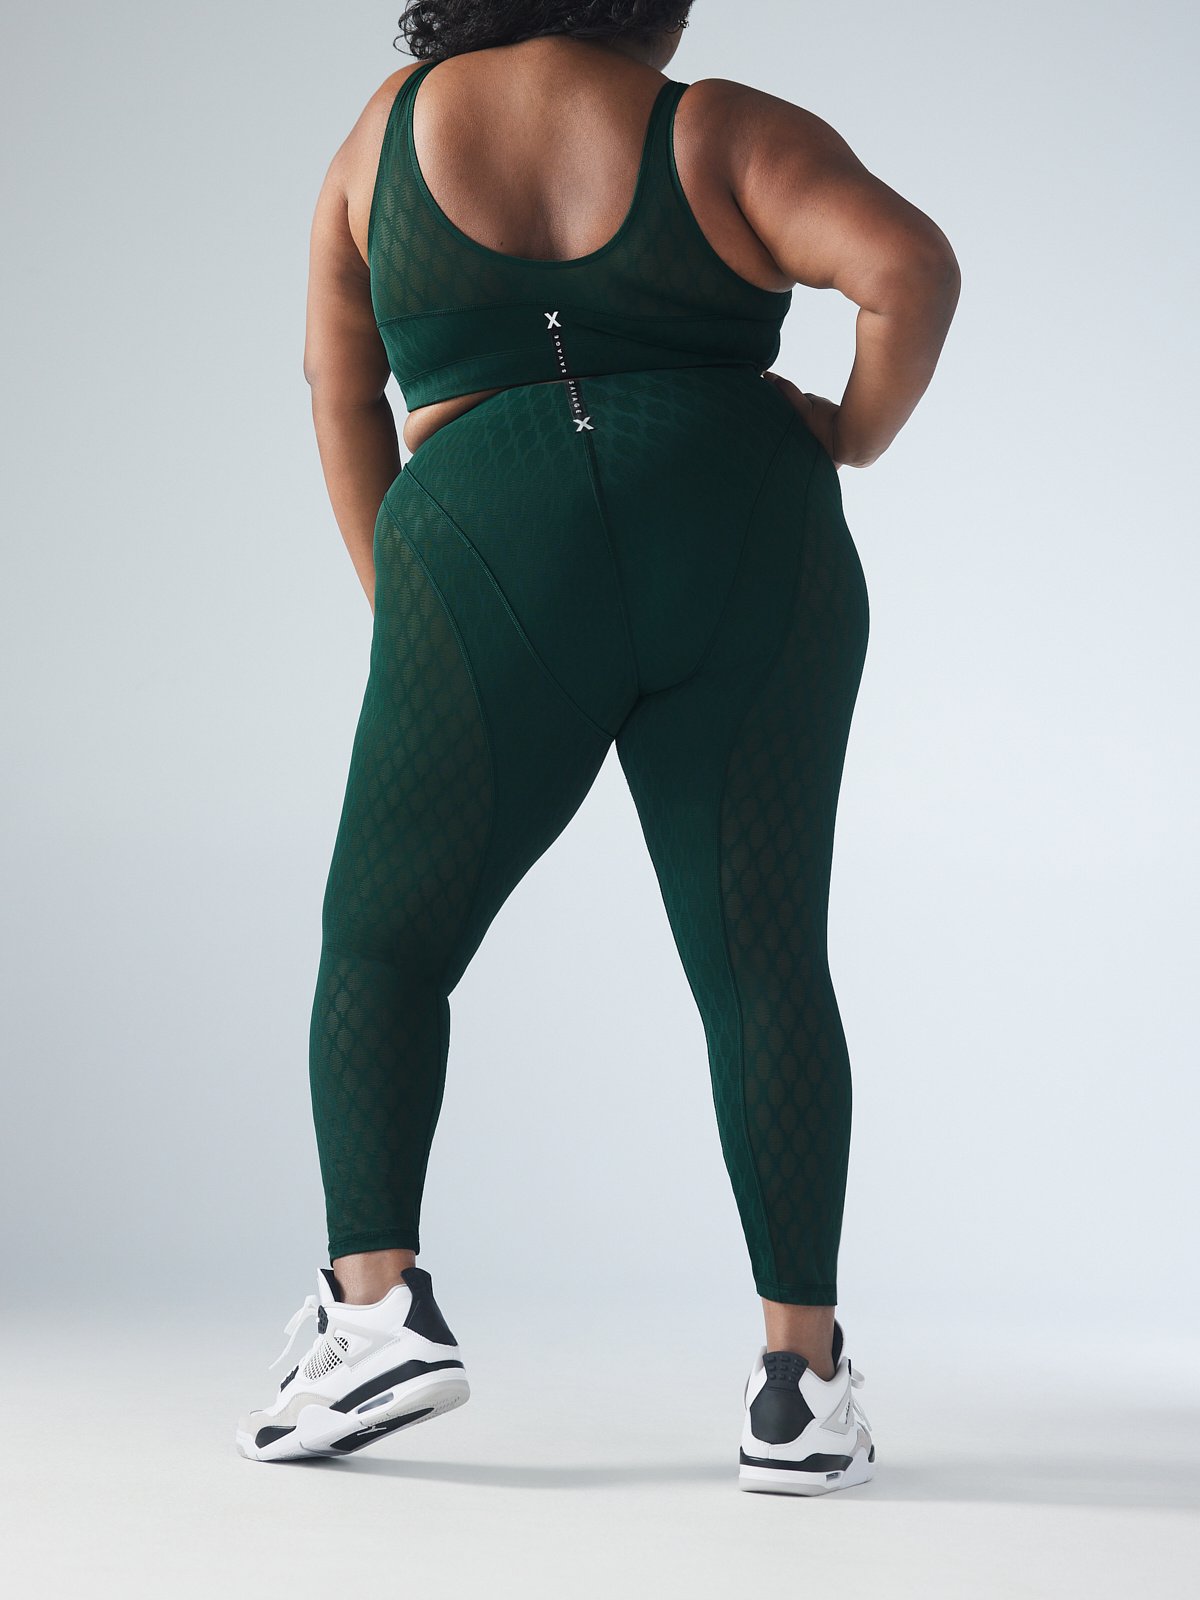 Plus Size for Her – Tagged 